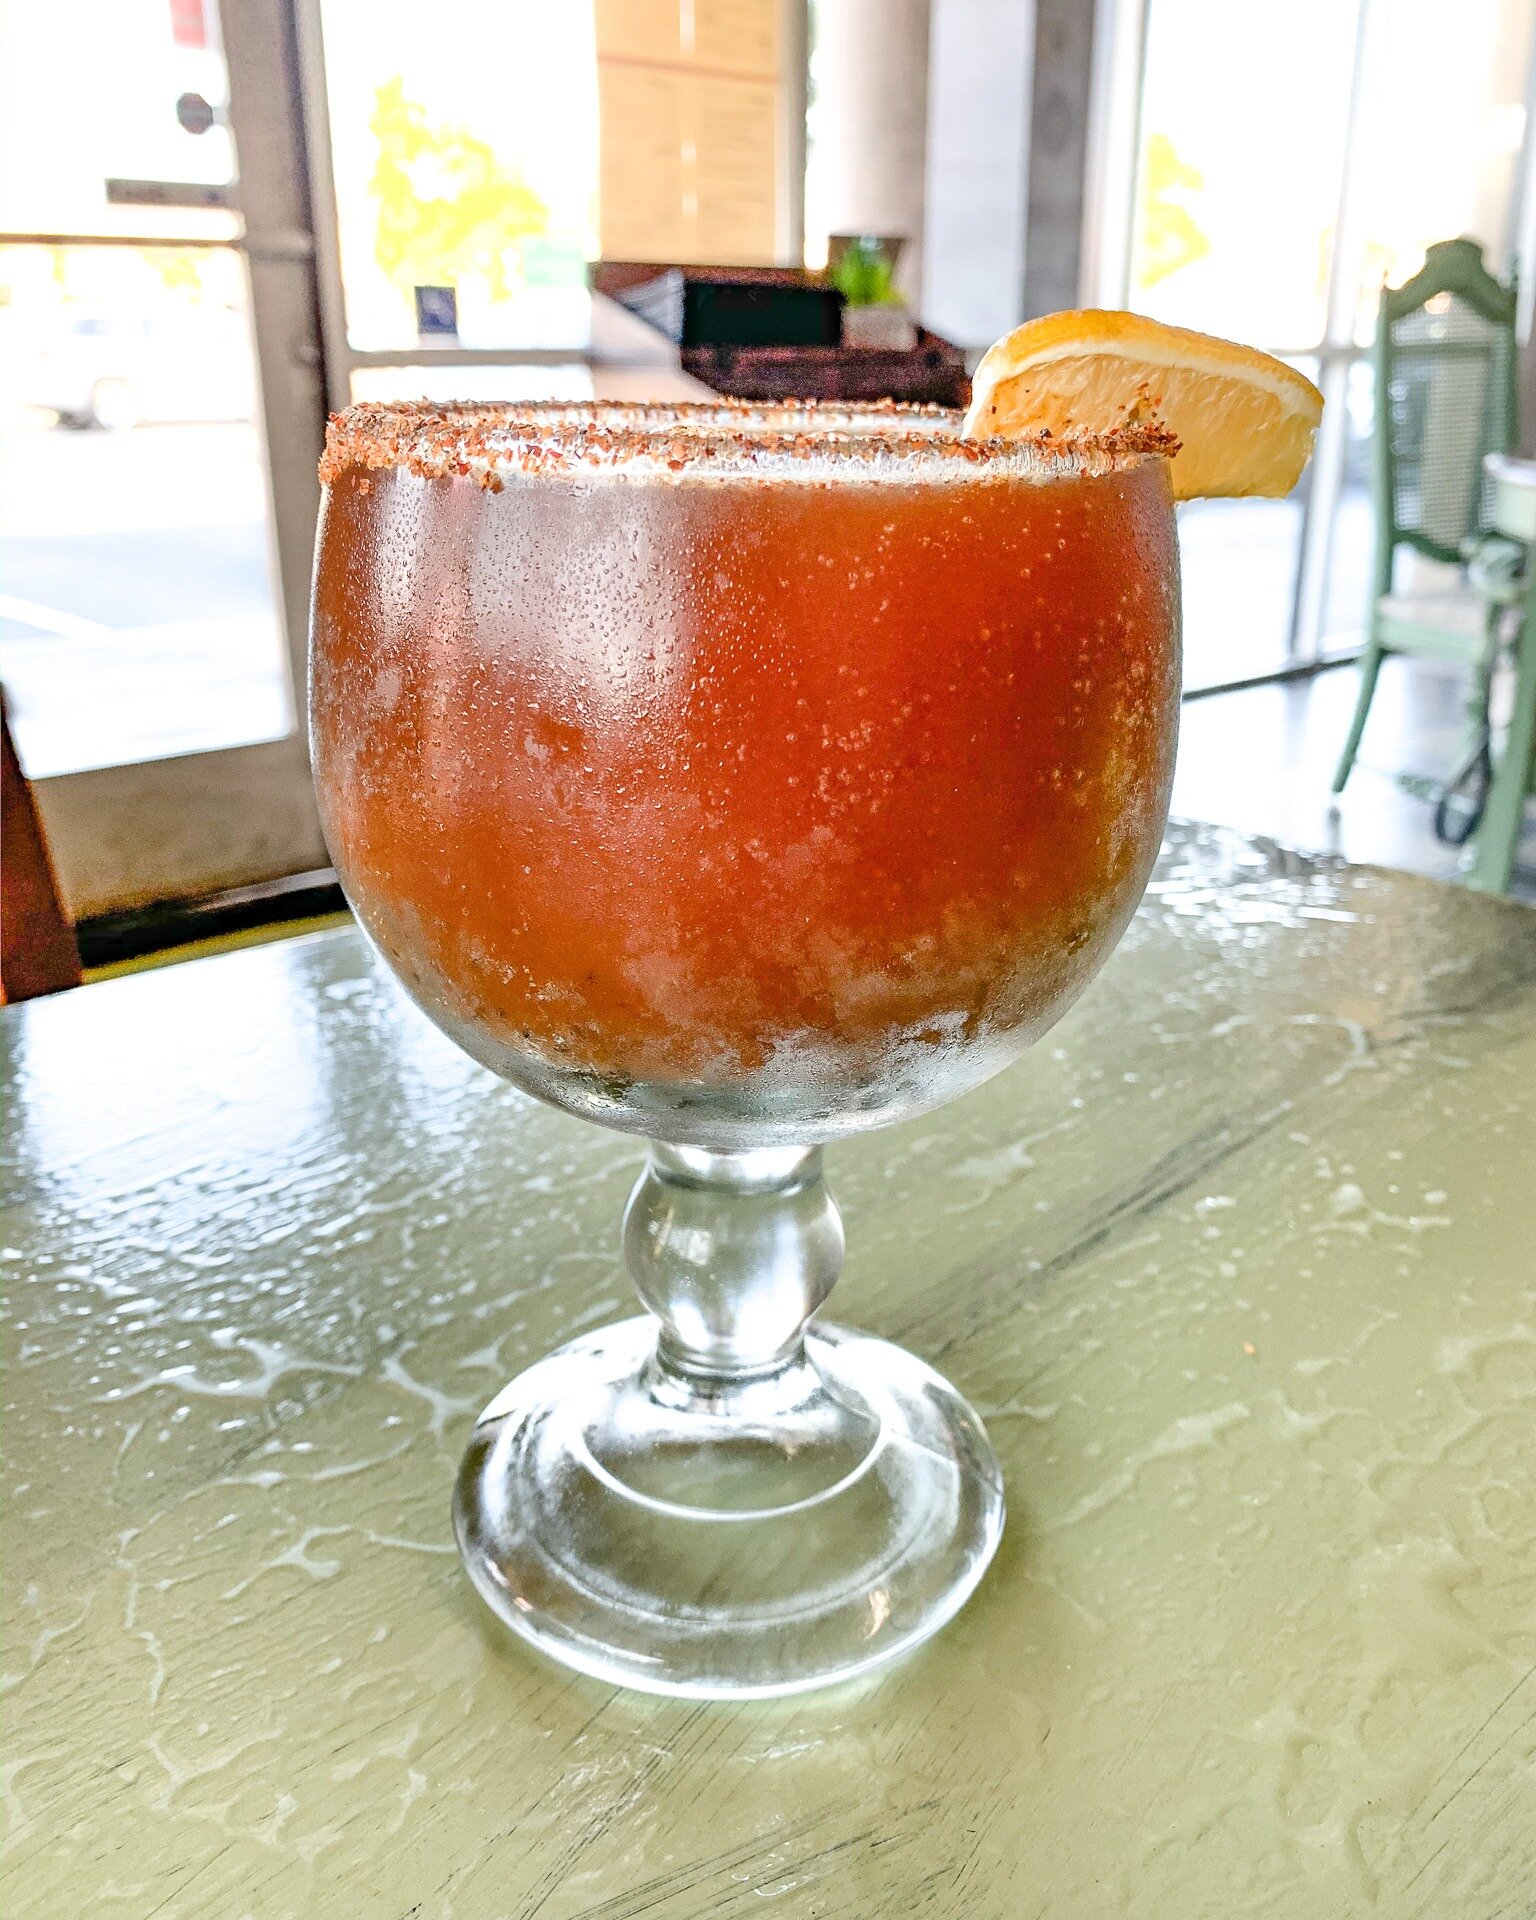 Raising a glass to #NationalBeerDay with a spicy twist! Here's to kicking back with a refreshing michelada and good company!

Drop a 🍺 below if you&rsquo;re celebrating! 

#dinegps #chivela #michelada #cheers #brunch